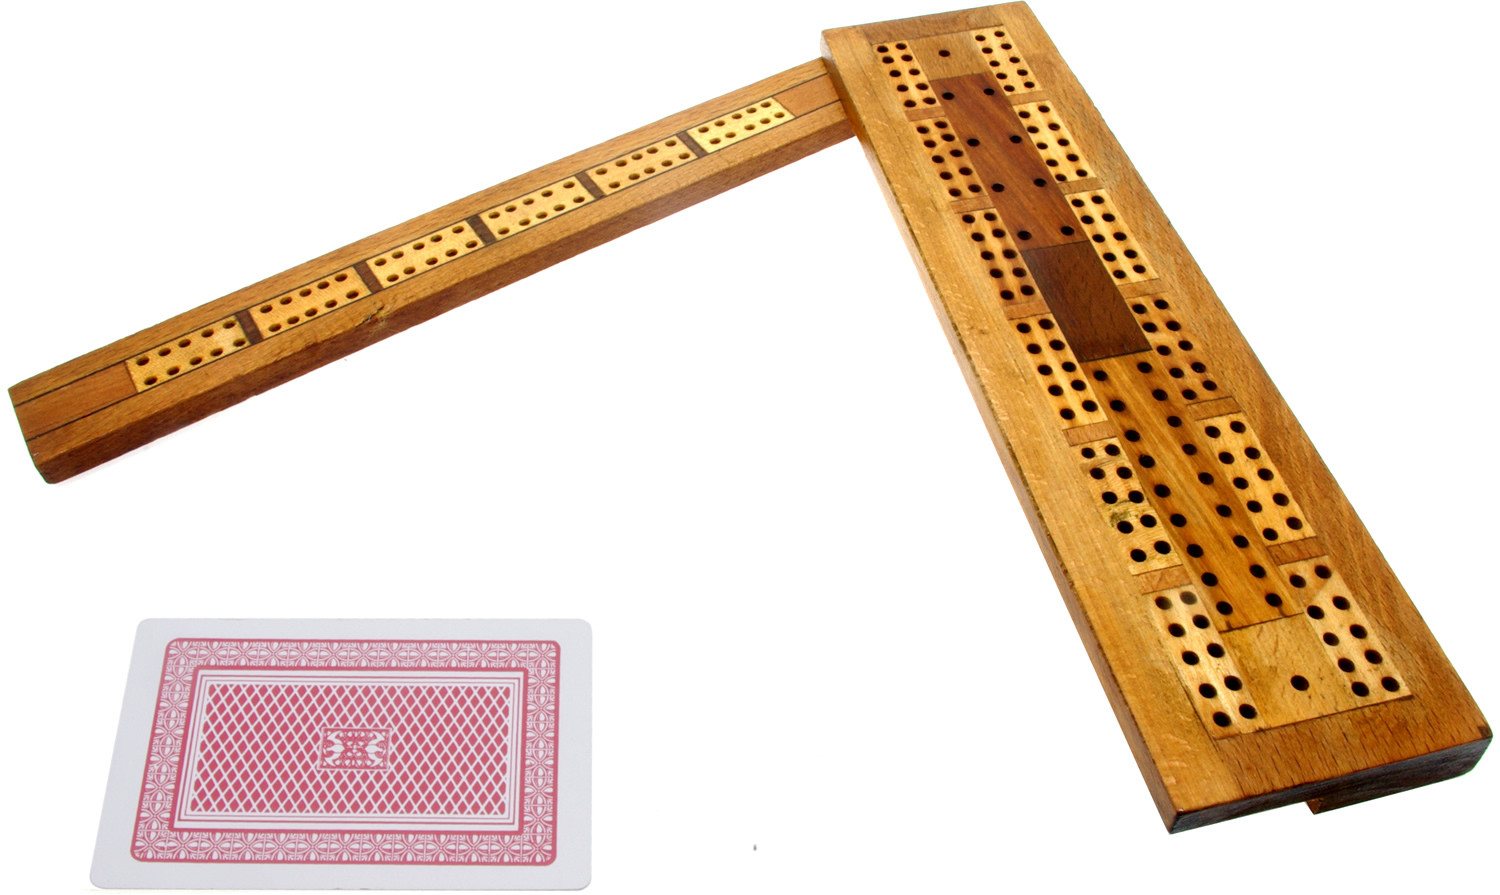 Extendable 3-track antique cribbage board